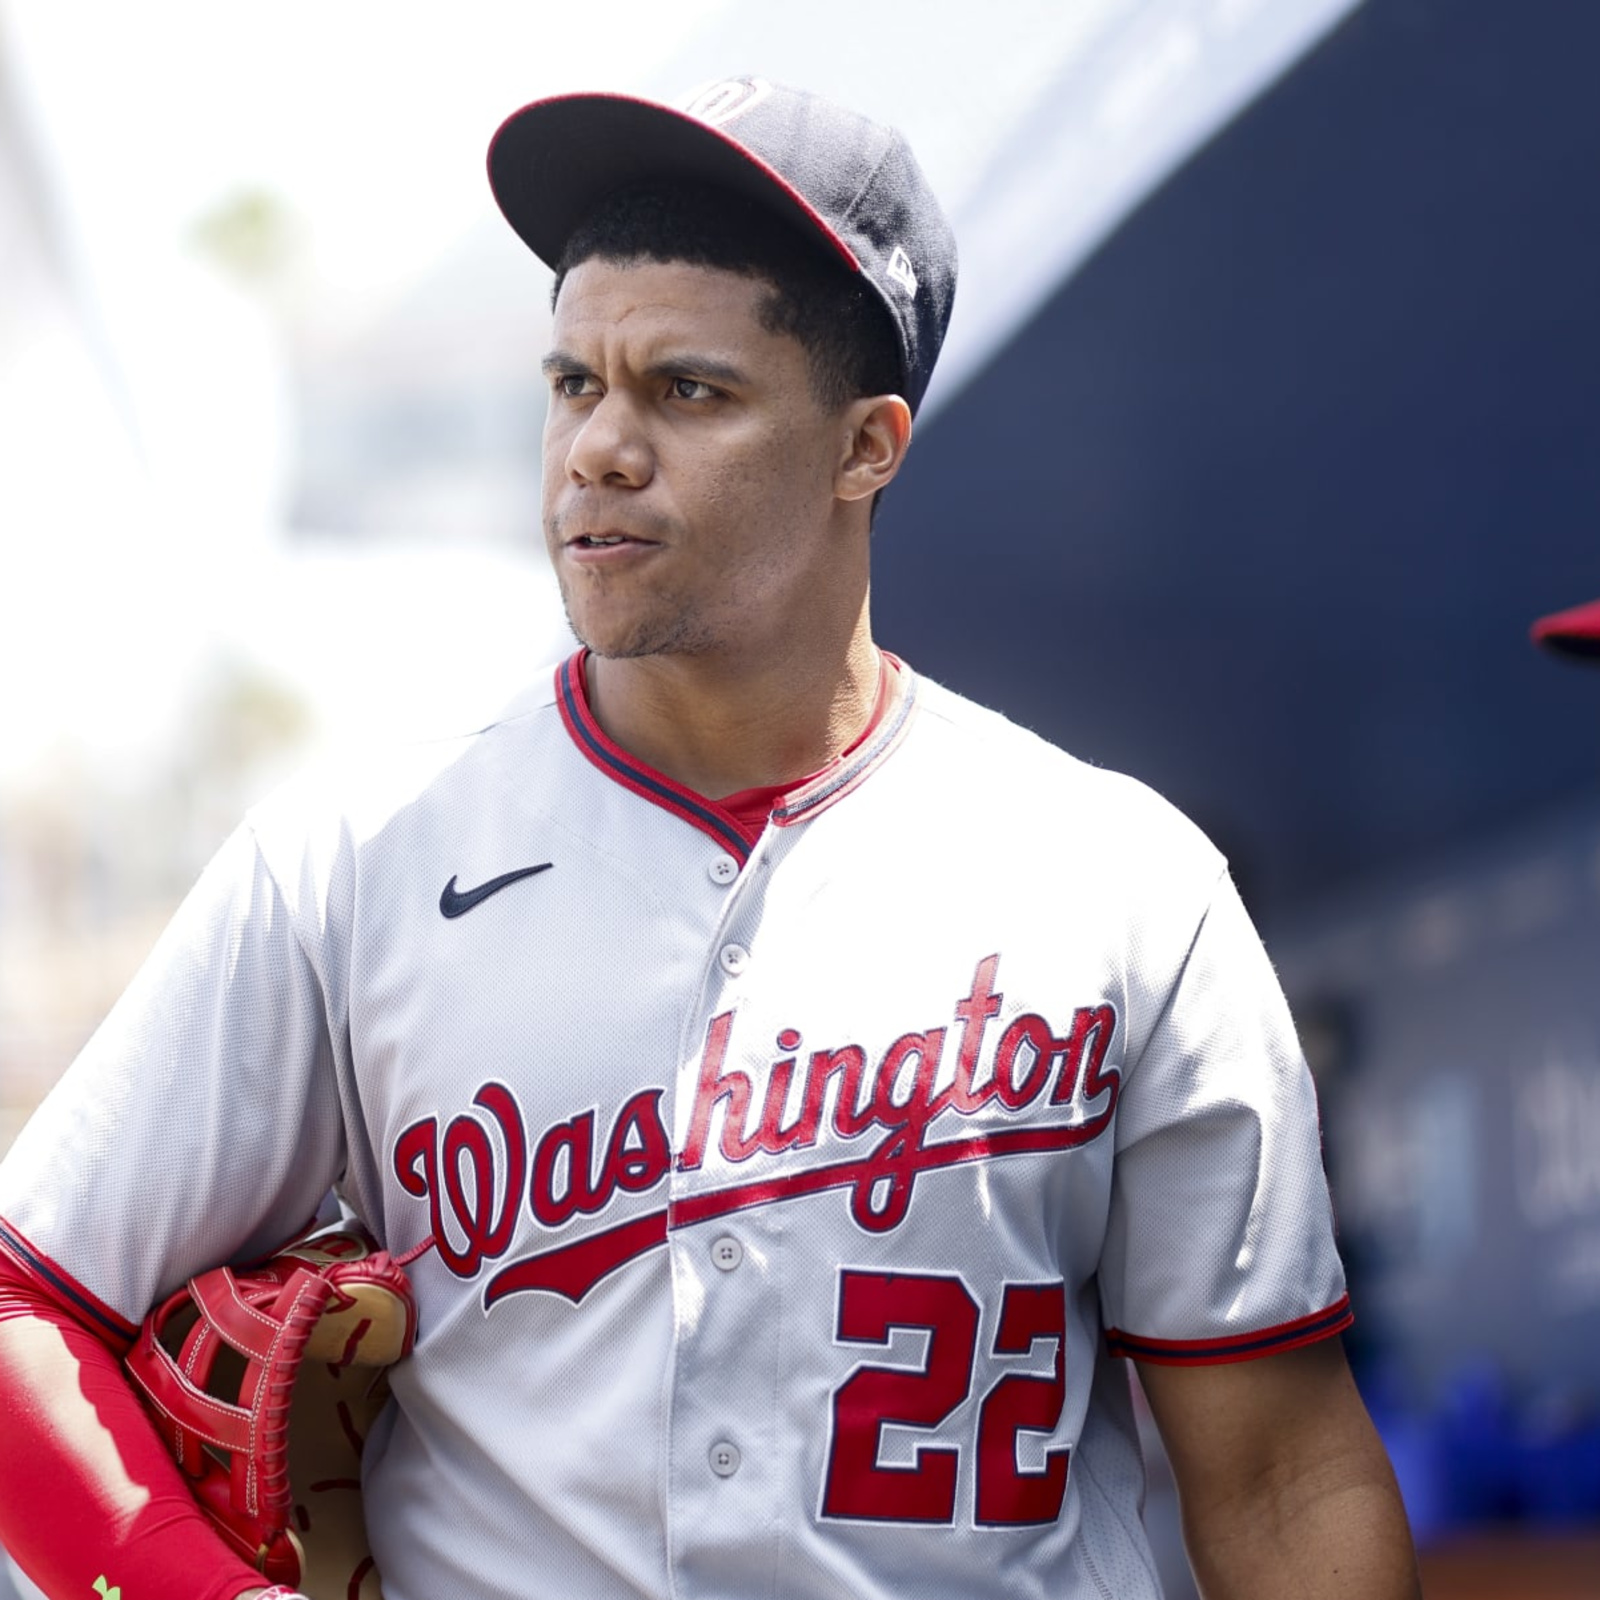 As Dad Predicted, Nationals Phenom Soto Stars at World Series